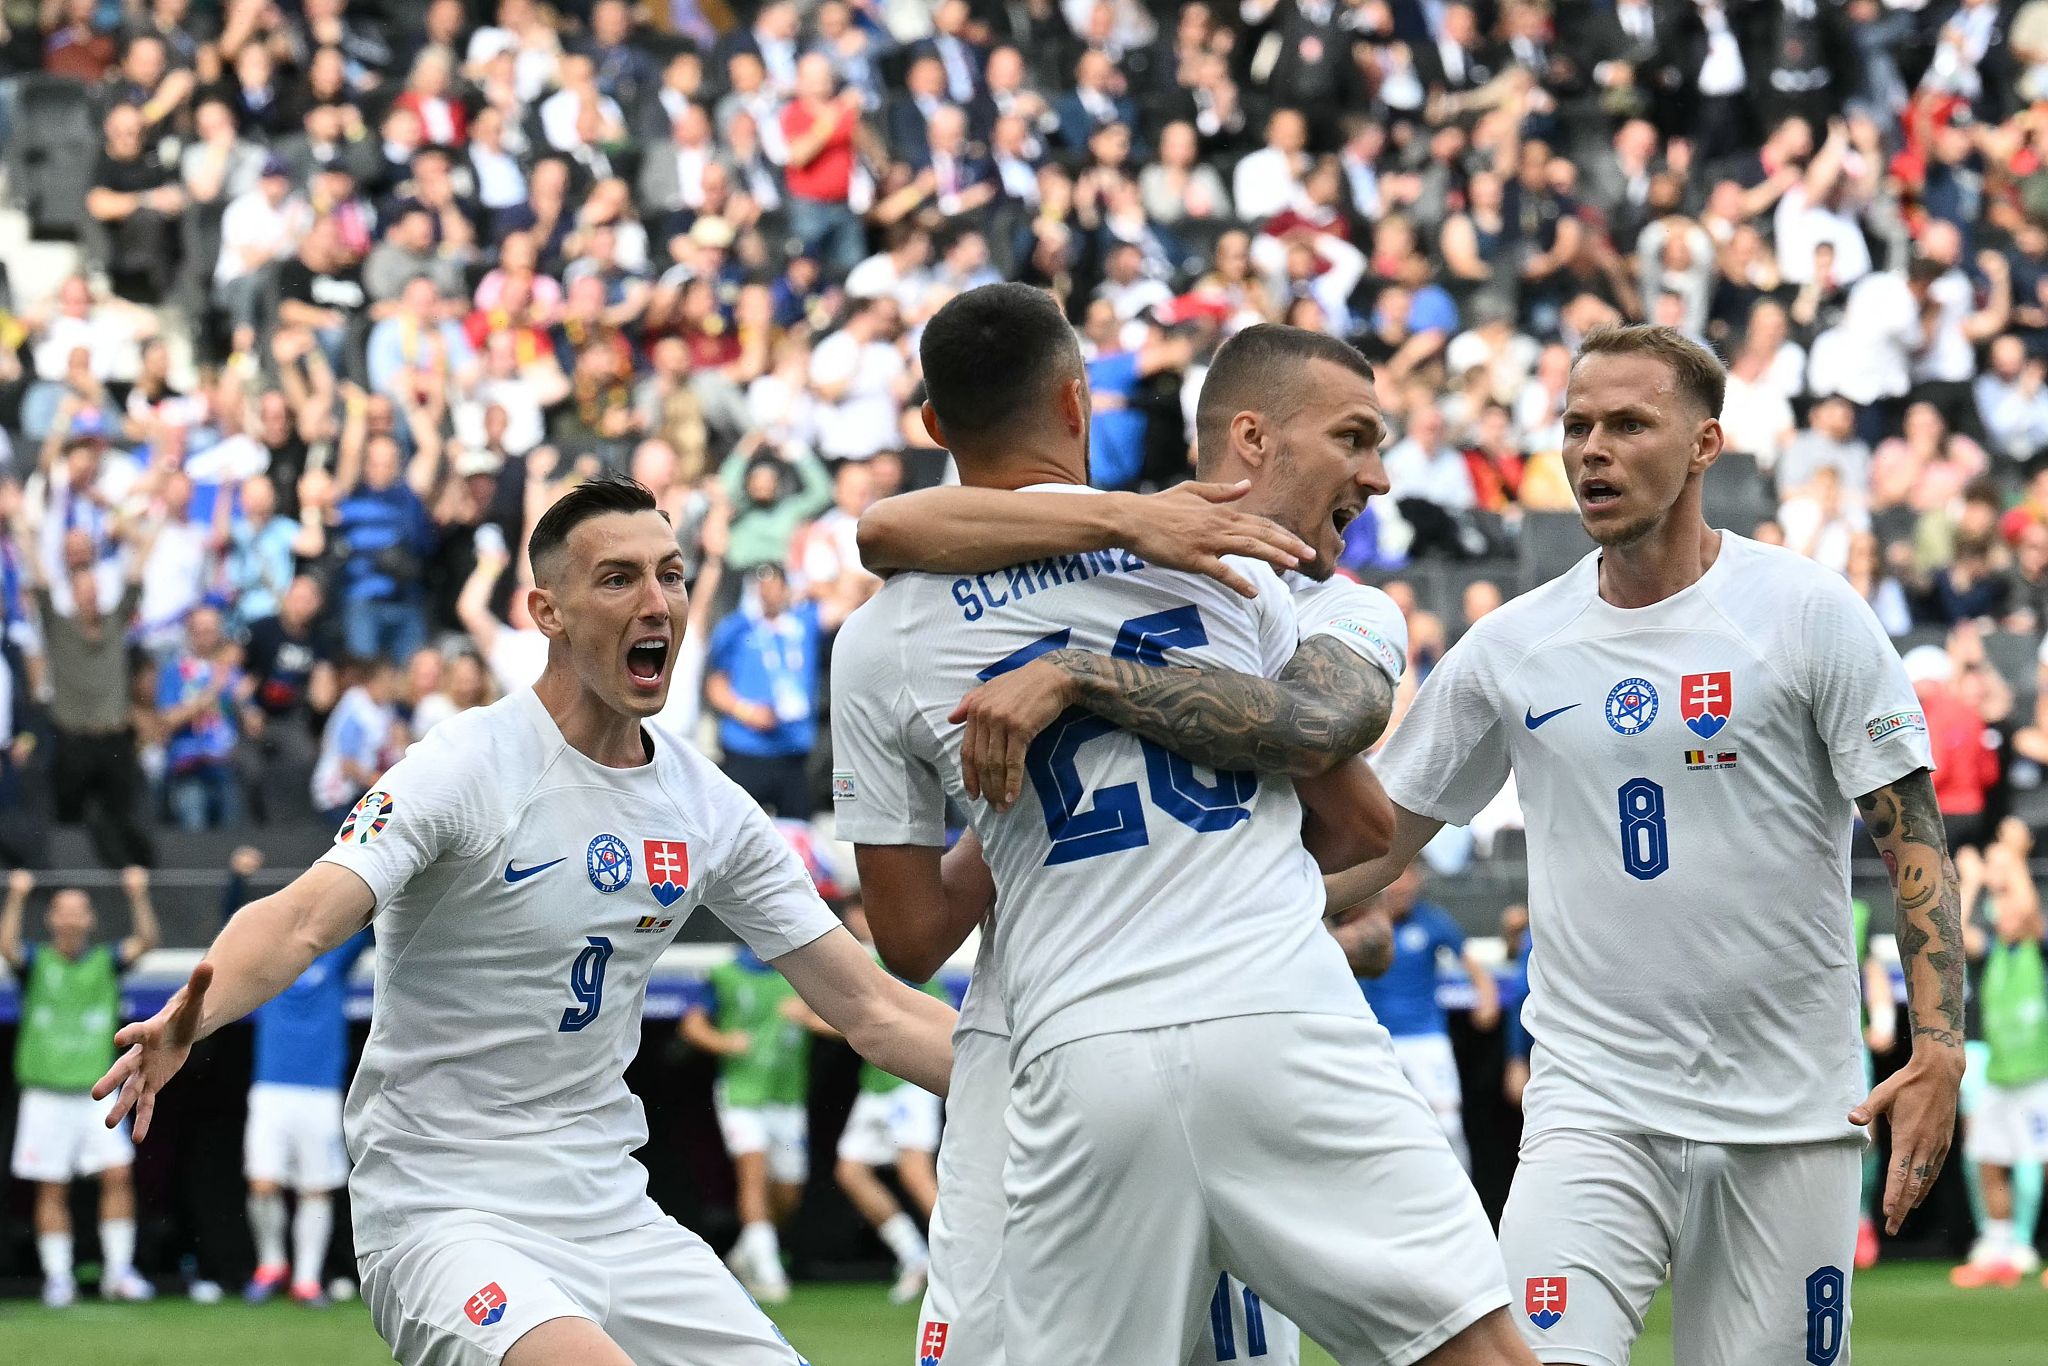 Slovakia's players celebrate after the team scored a goal in the UEFA European Championship group game against Belgium at the Frankfurt Arena in Frankfurt, Germany, June 17, 2024. /CFP